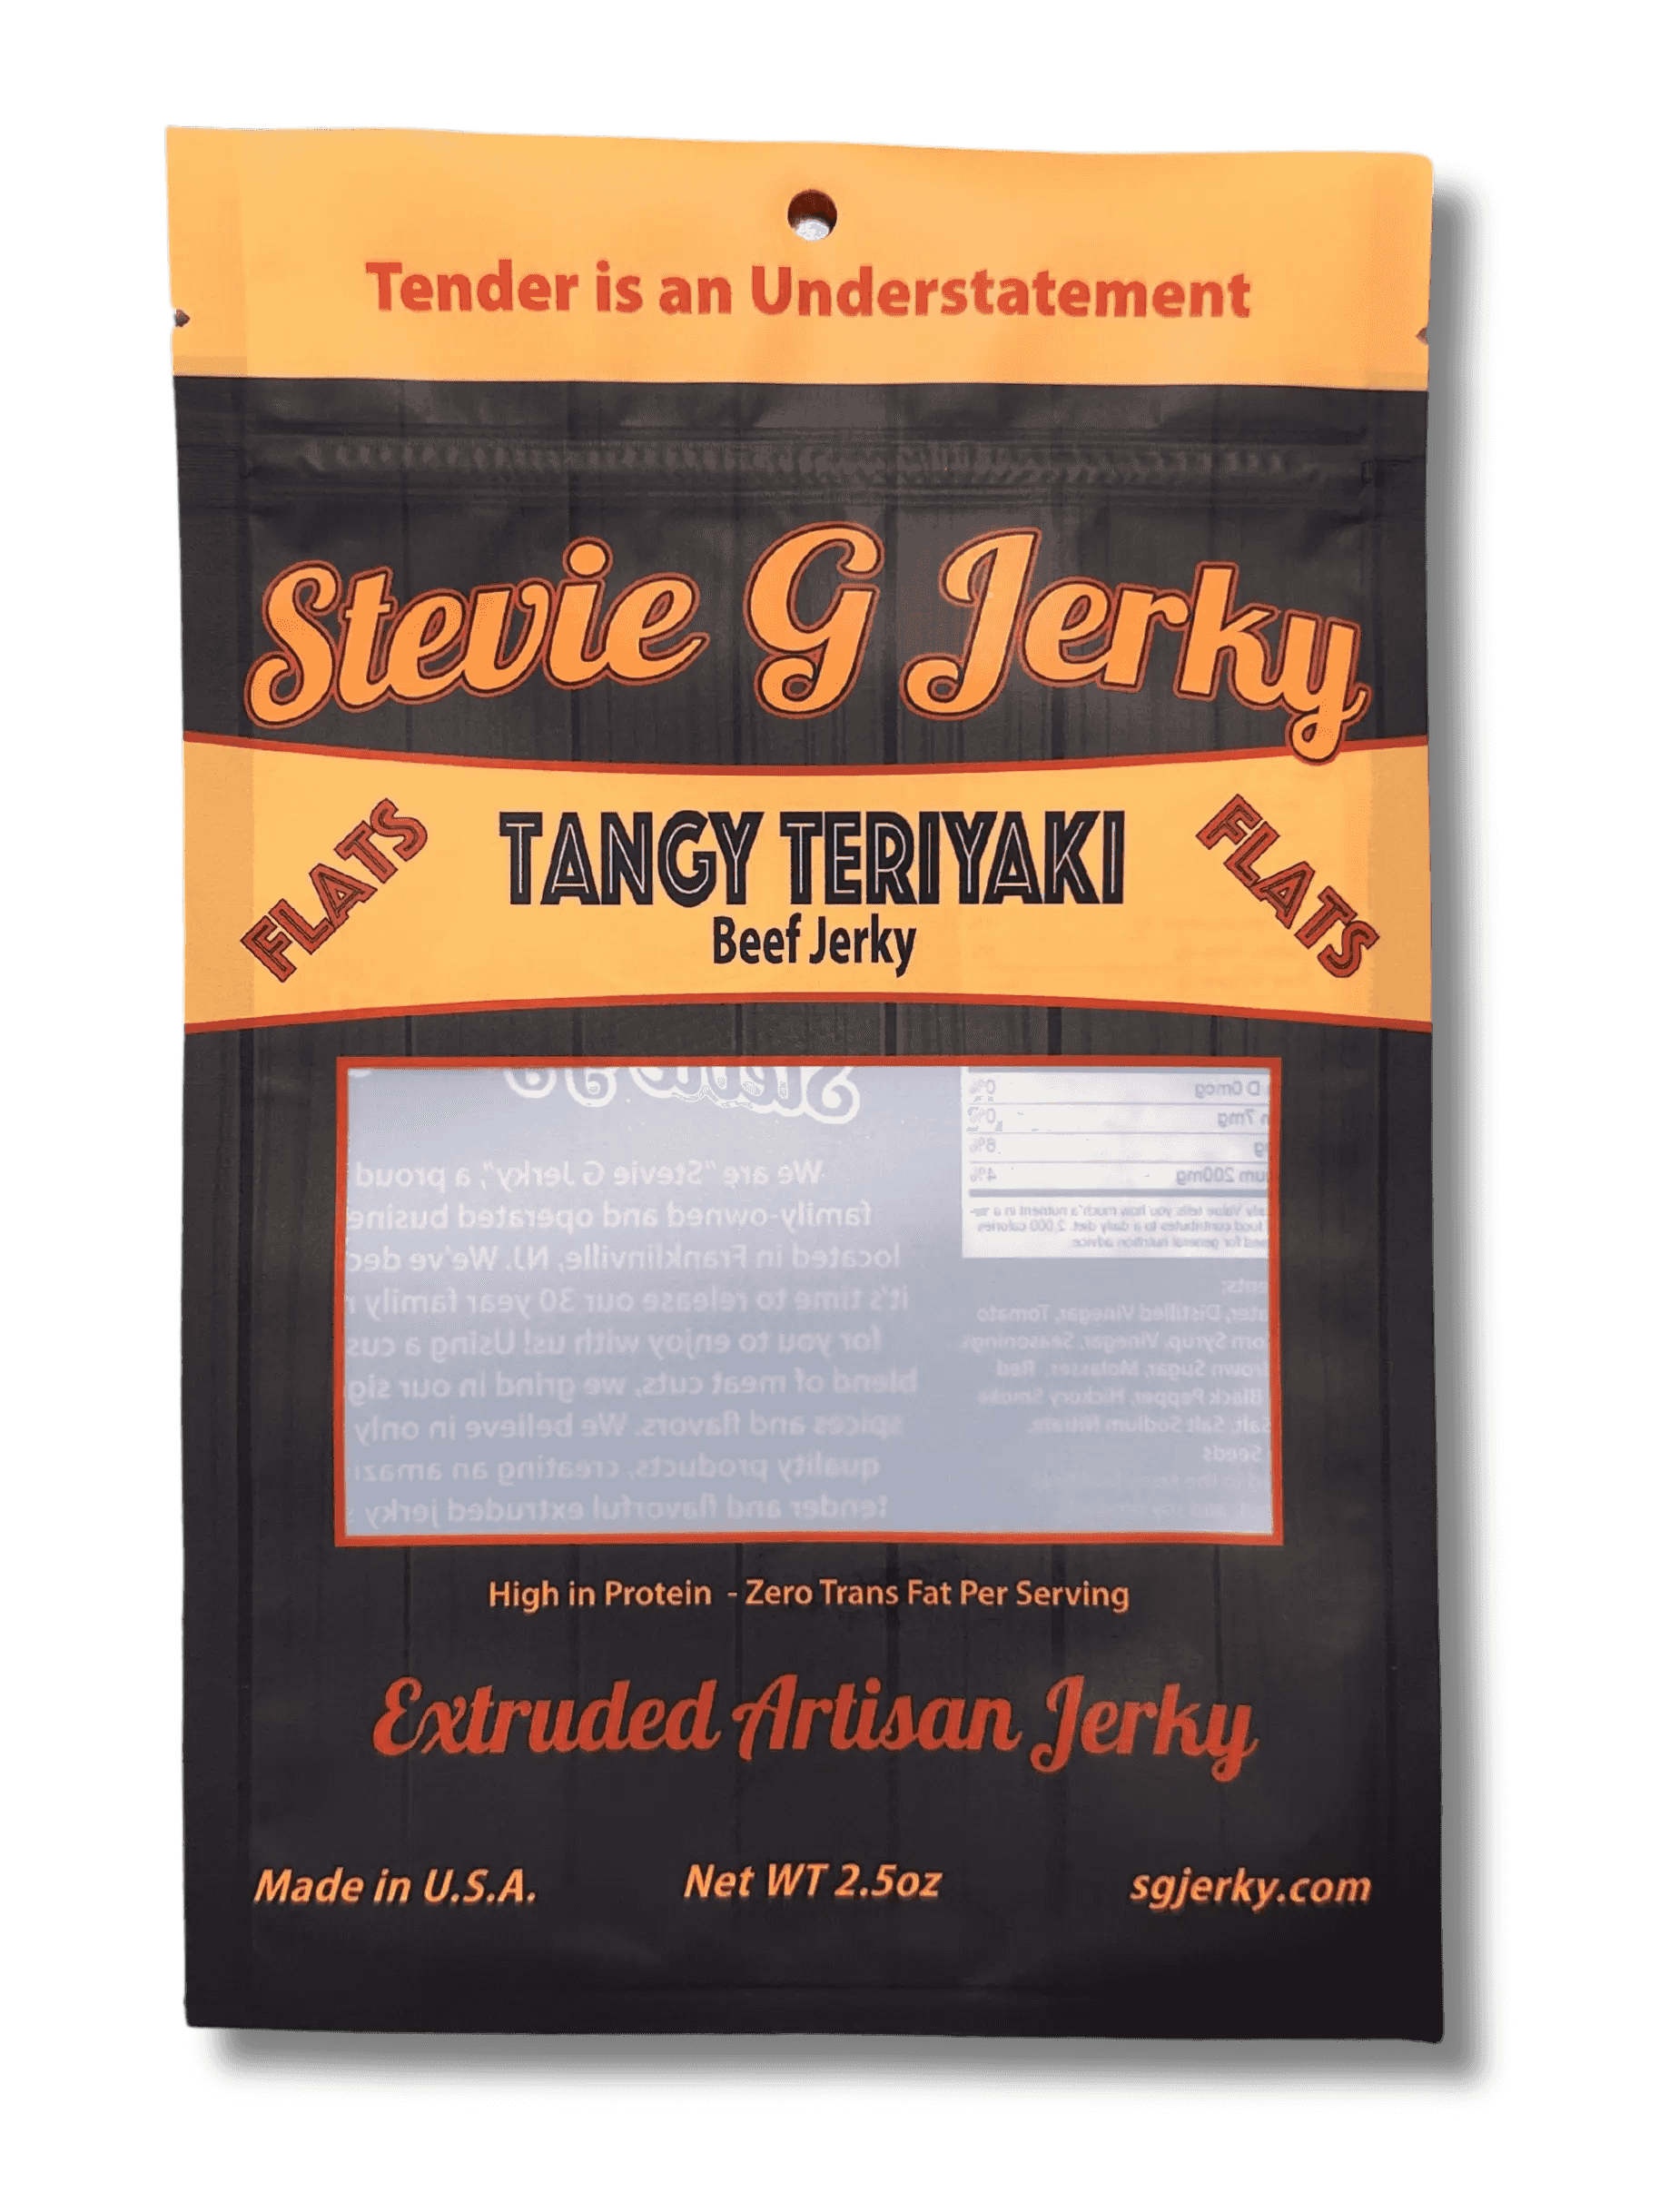 Steve G's Tangy Teriyaki Beef Jerky Flats product package